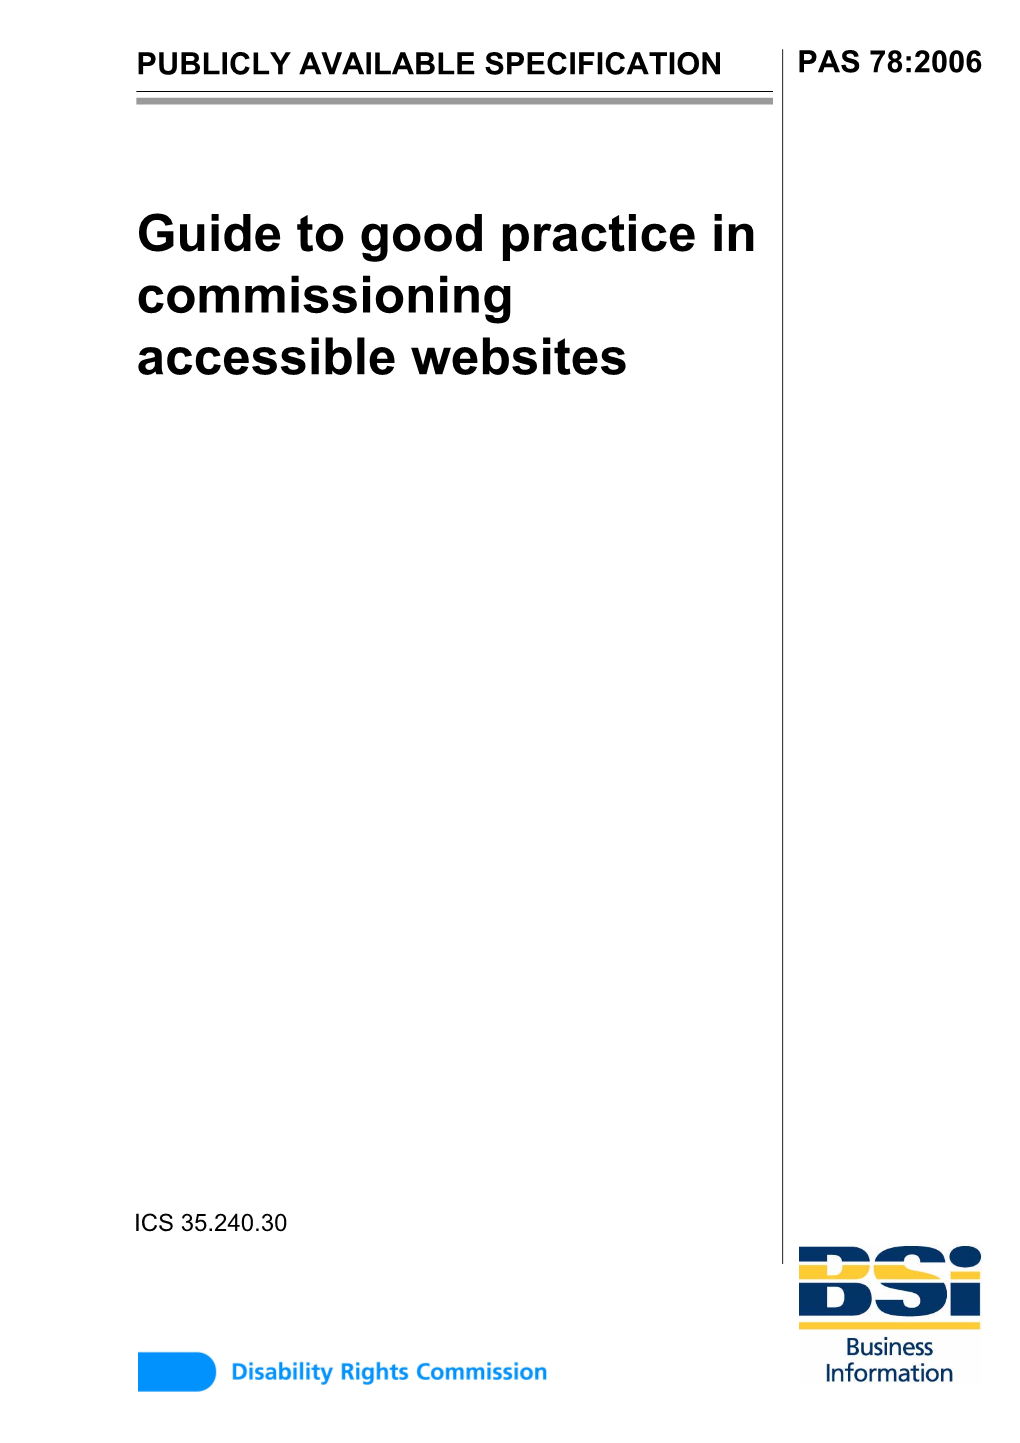 Guide to Good Practice in Commissioning Accessible Websites